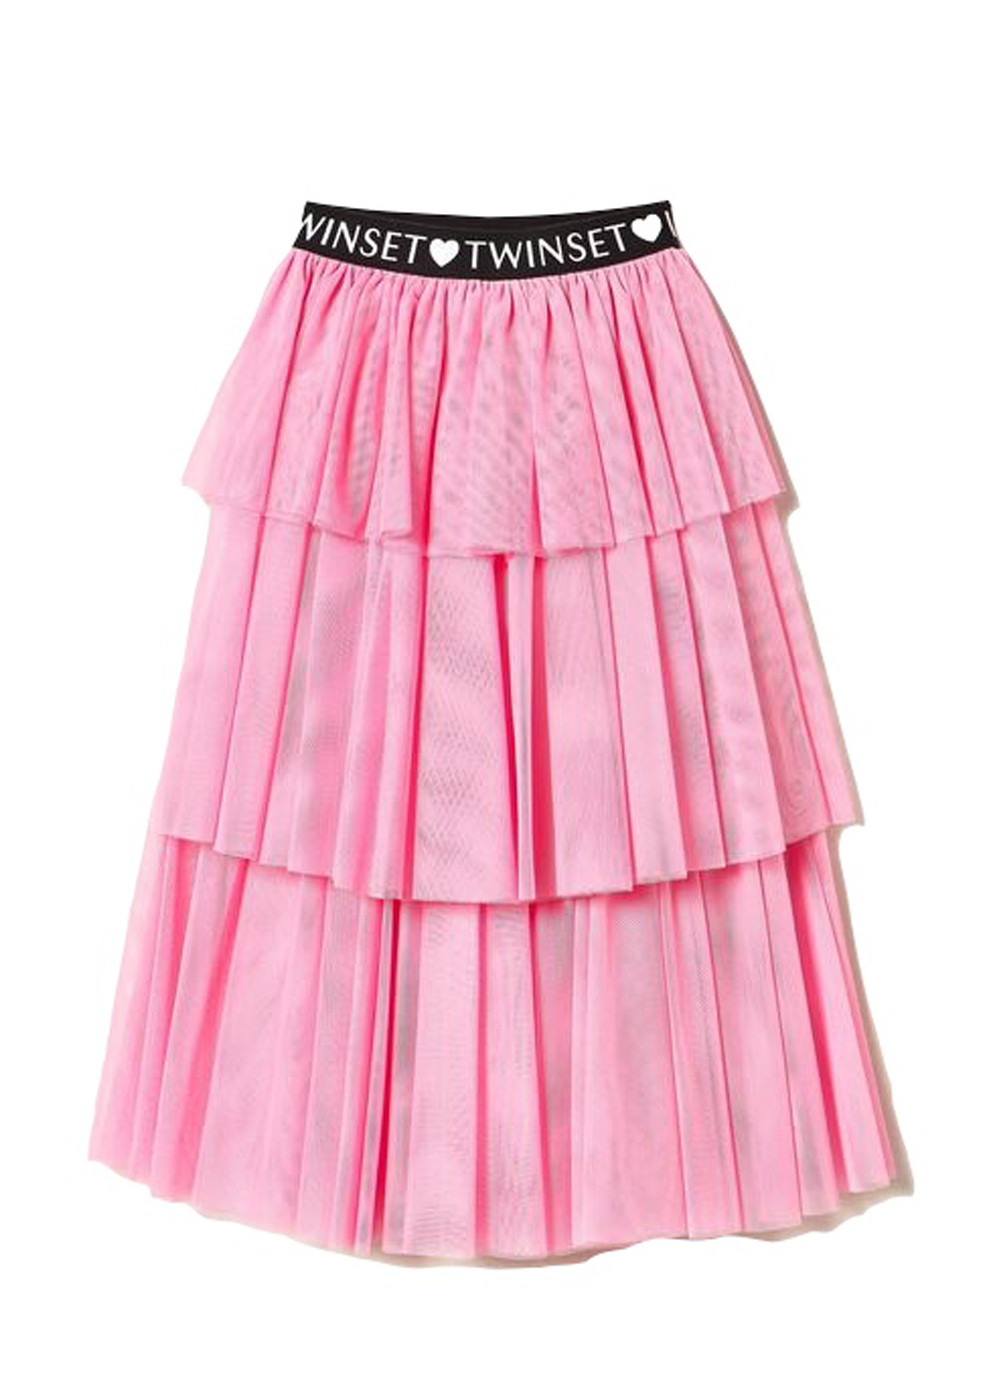 Featured image for “TWINSET GONNA LUNGA IN TULLE”